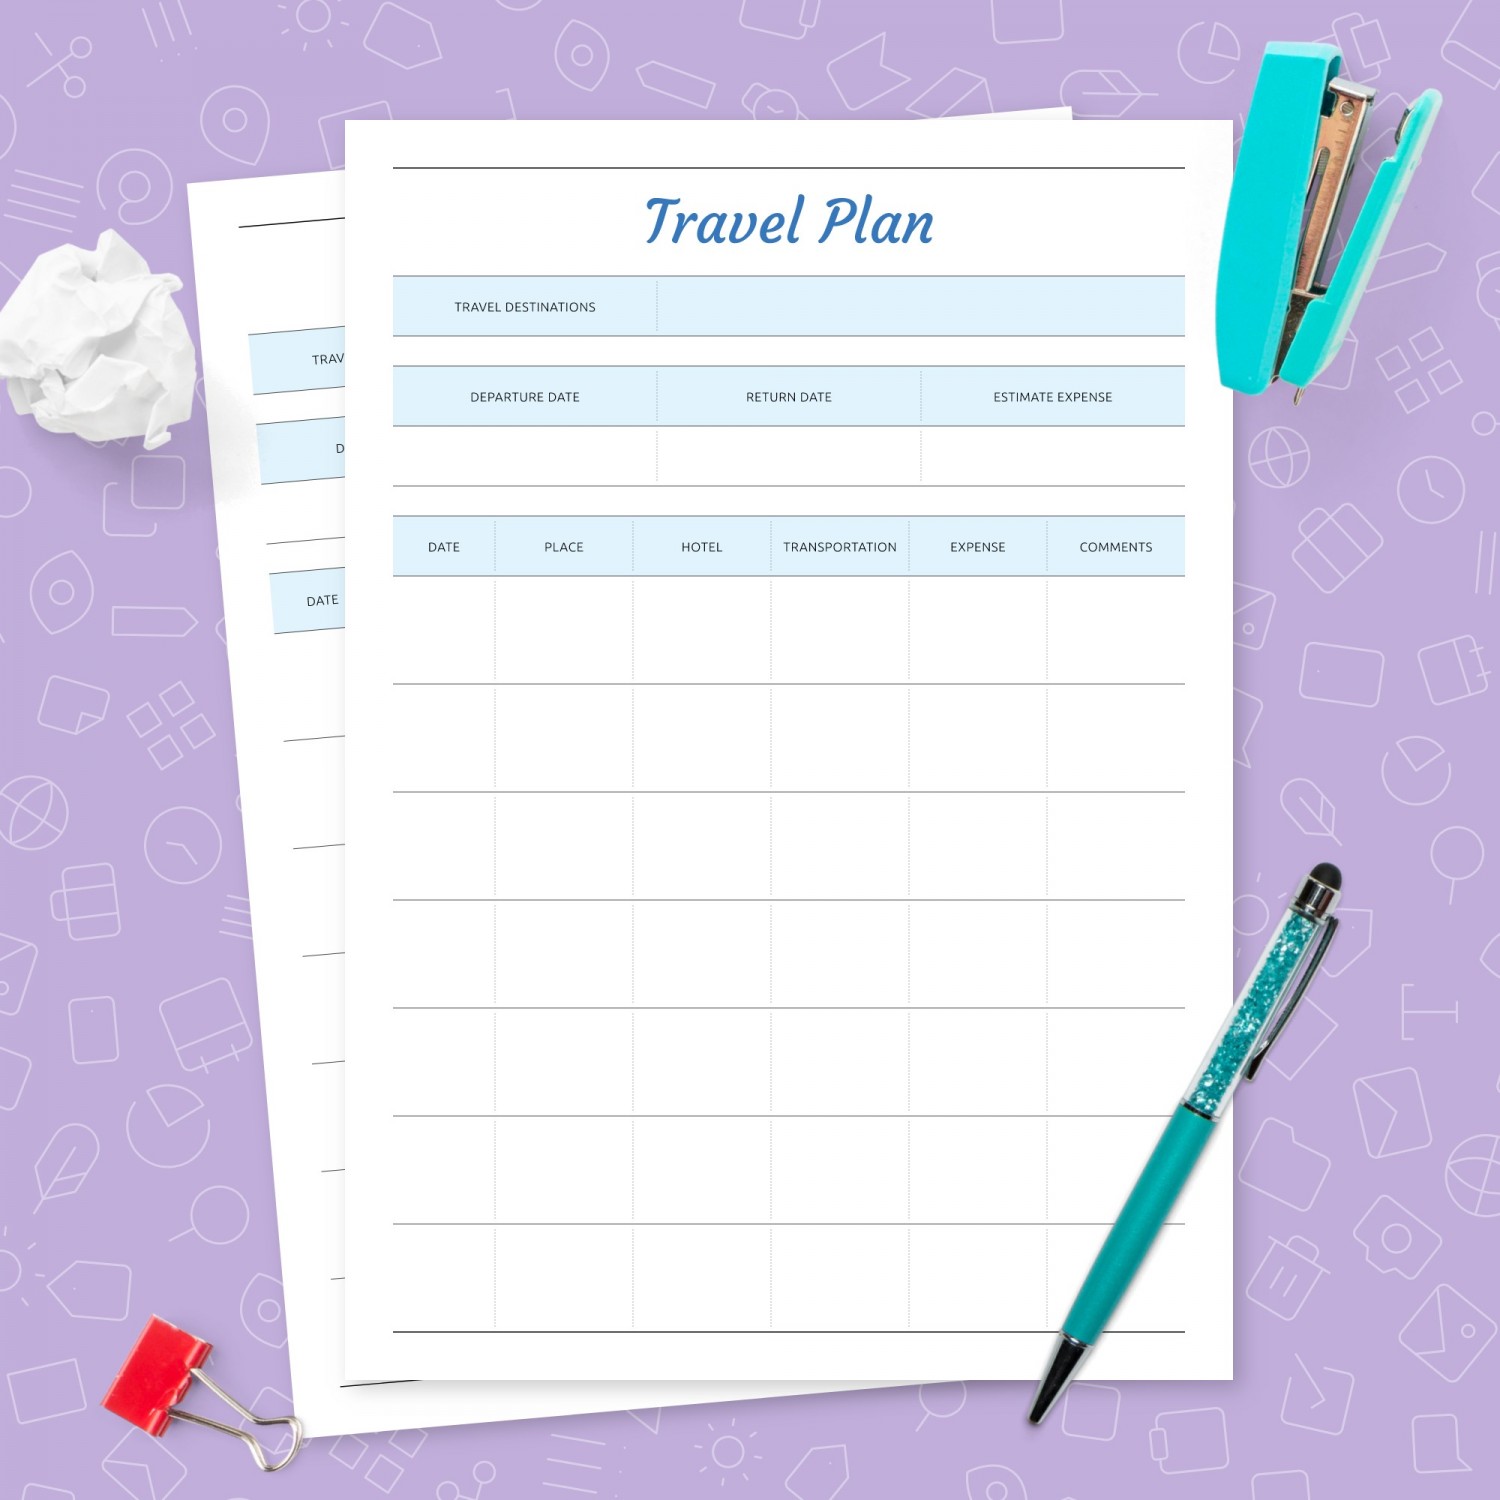 travel and tour business plan download